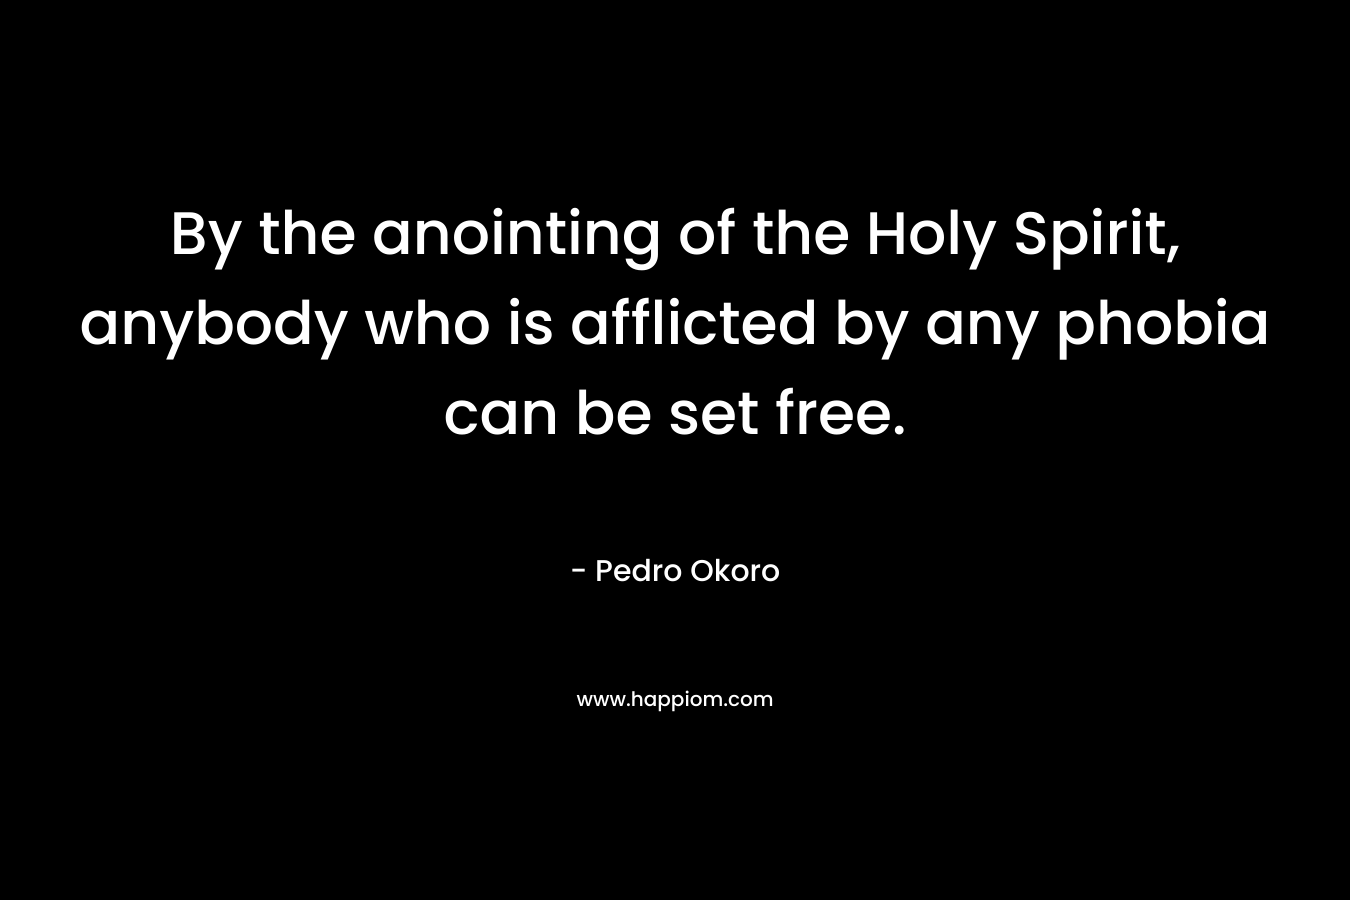 By the anointing of the Holy Spirit, anybody who is afflicted by any phobia can be set free. – Pedro Okoro